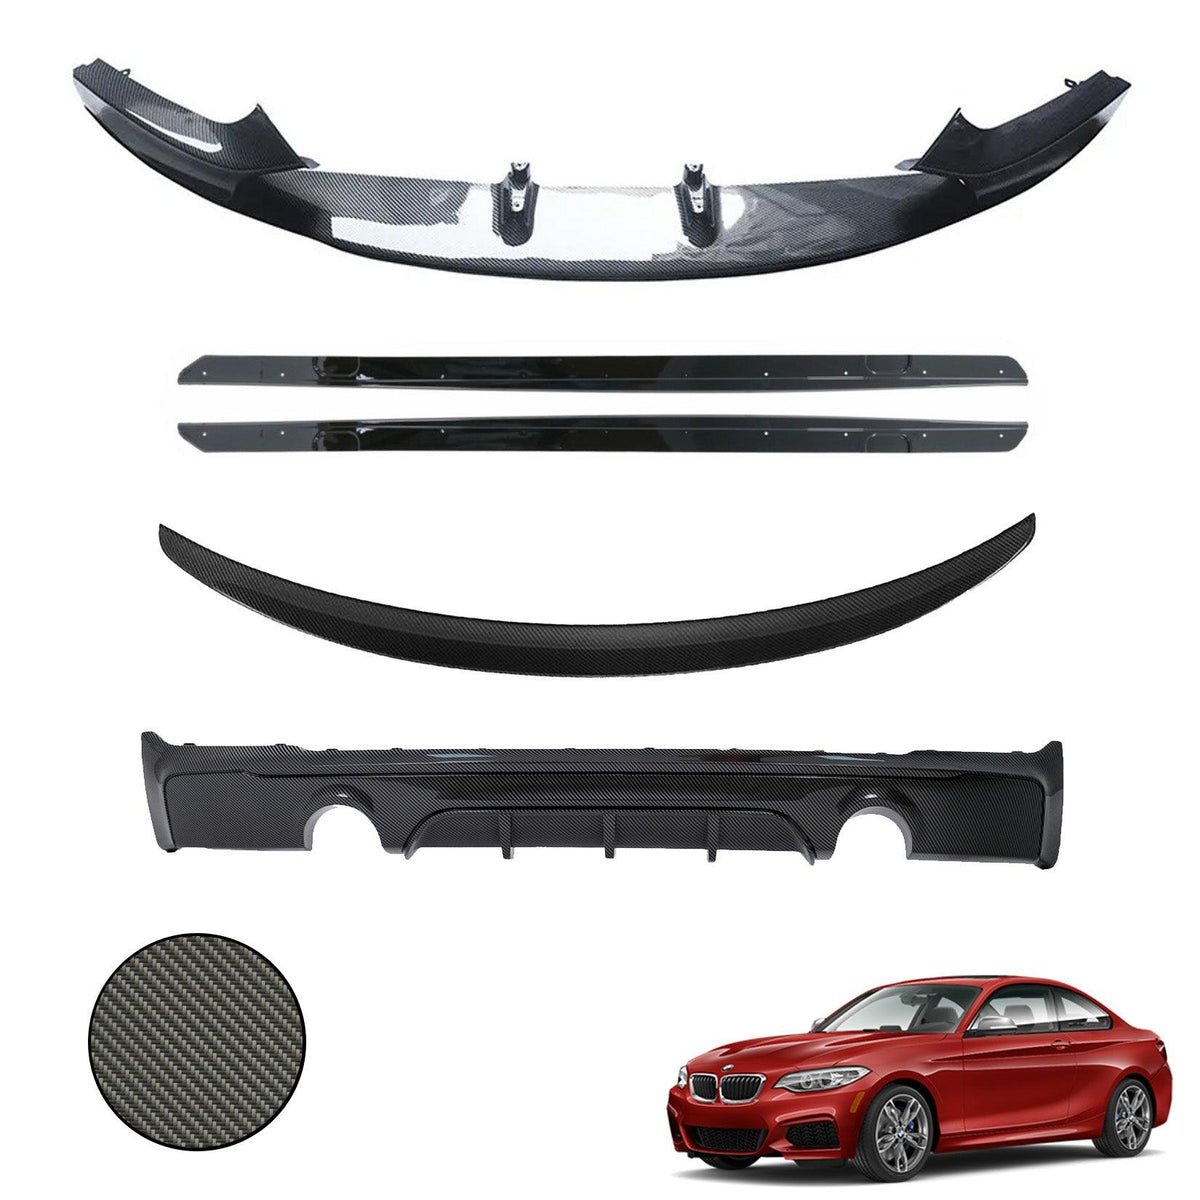 BMW 2 SERIES F22 2014-2021 FULL AERO BODY KIT IN CARBON LOOK - DIFFUSER 0___0 - RisperStyling